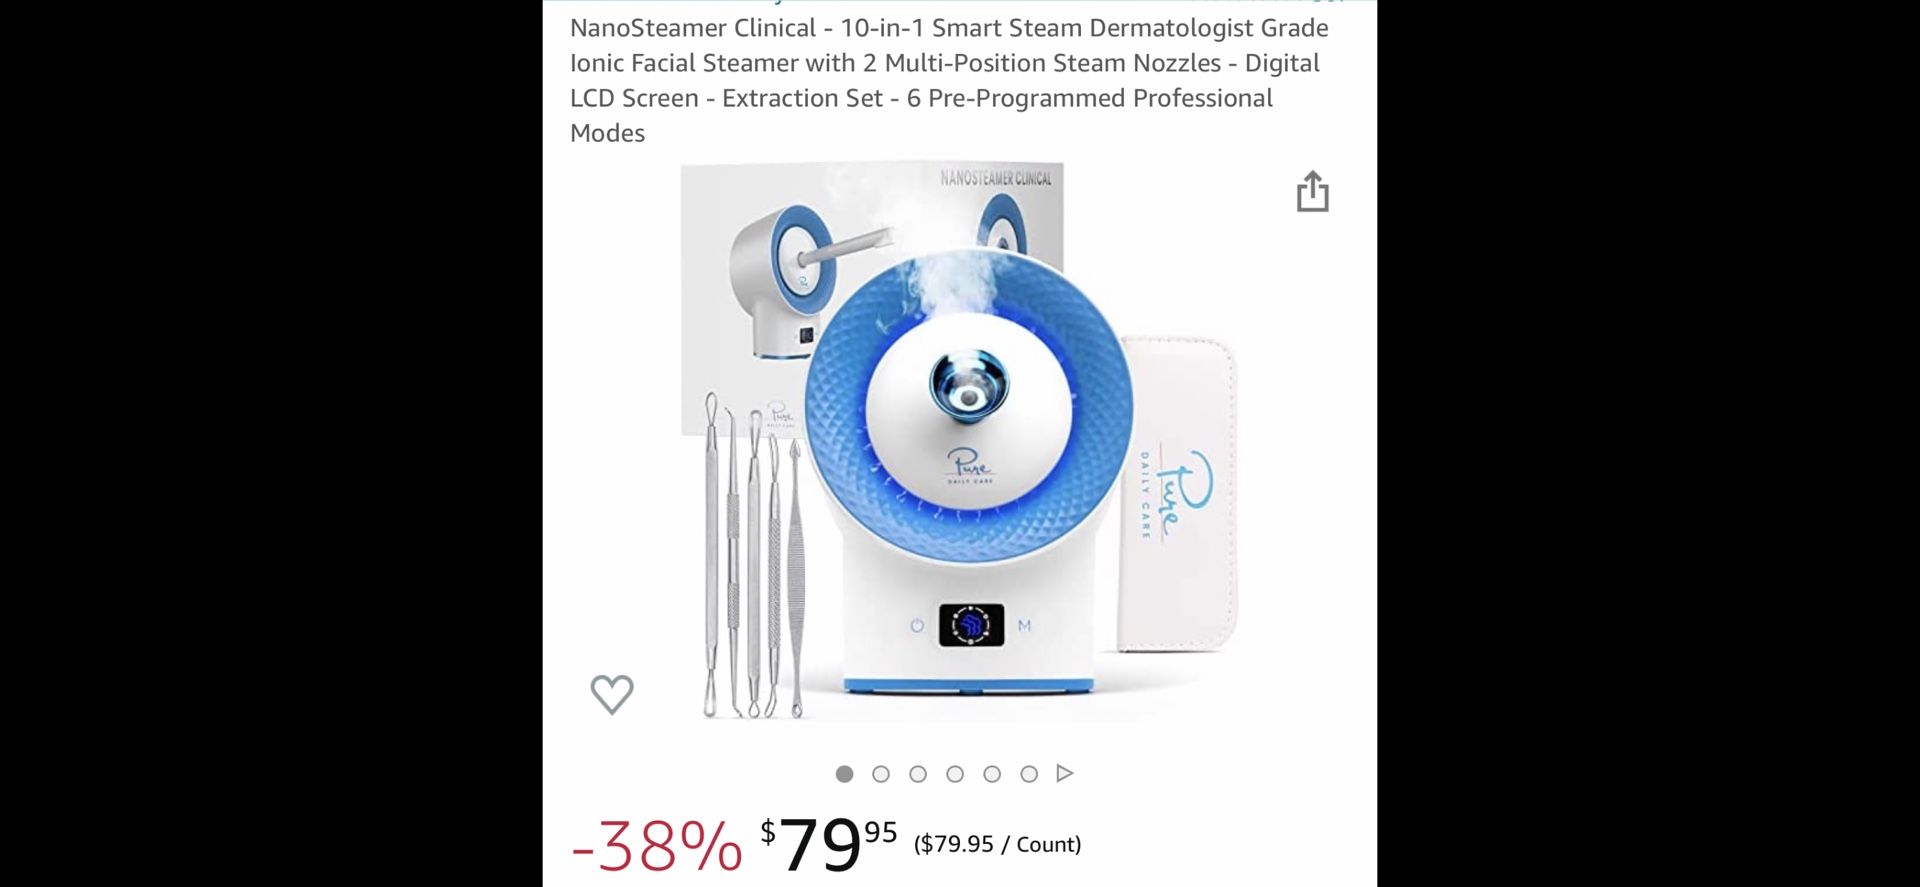 NanoSteamer Clinical - 10-in-1 Smart Steam Dermatologist Grade lonic Facial Steamer with 2 Multi-Position Steam Nozzles - Digital LCD Screen - Extract